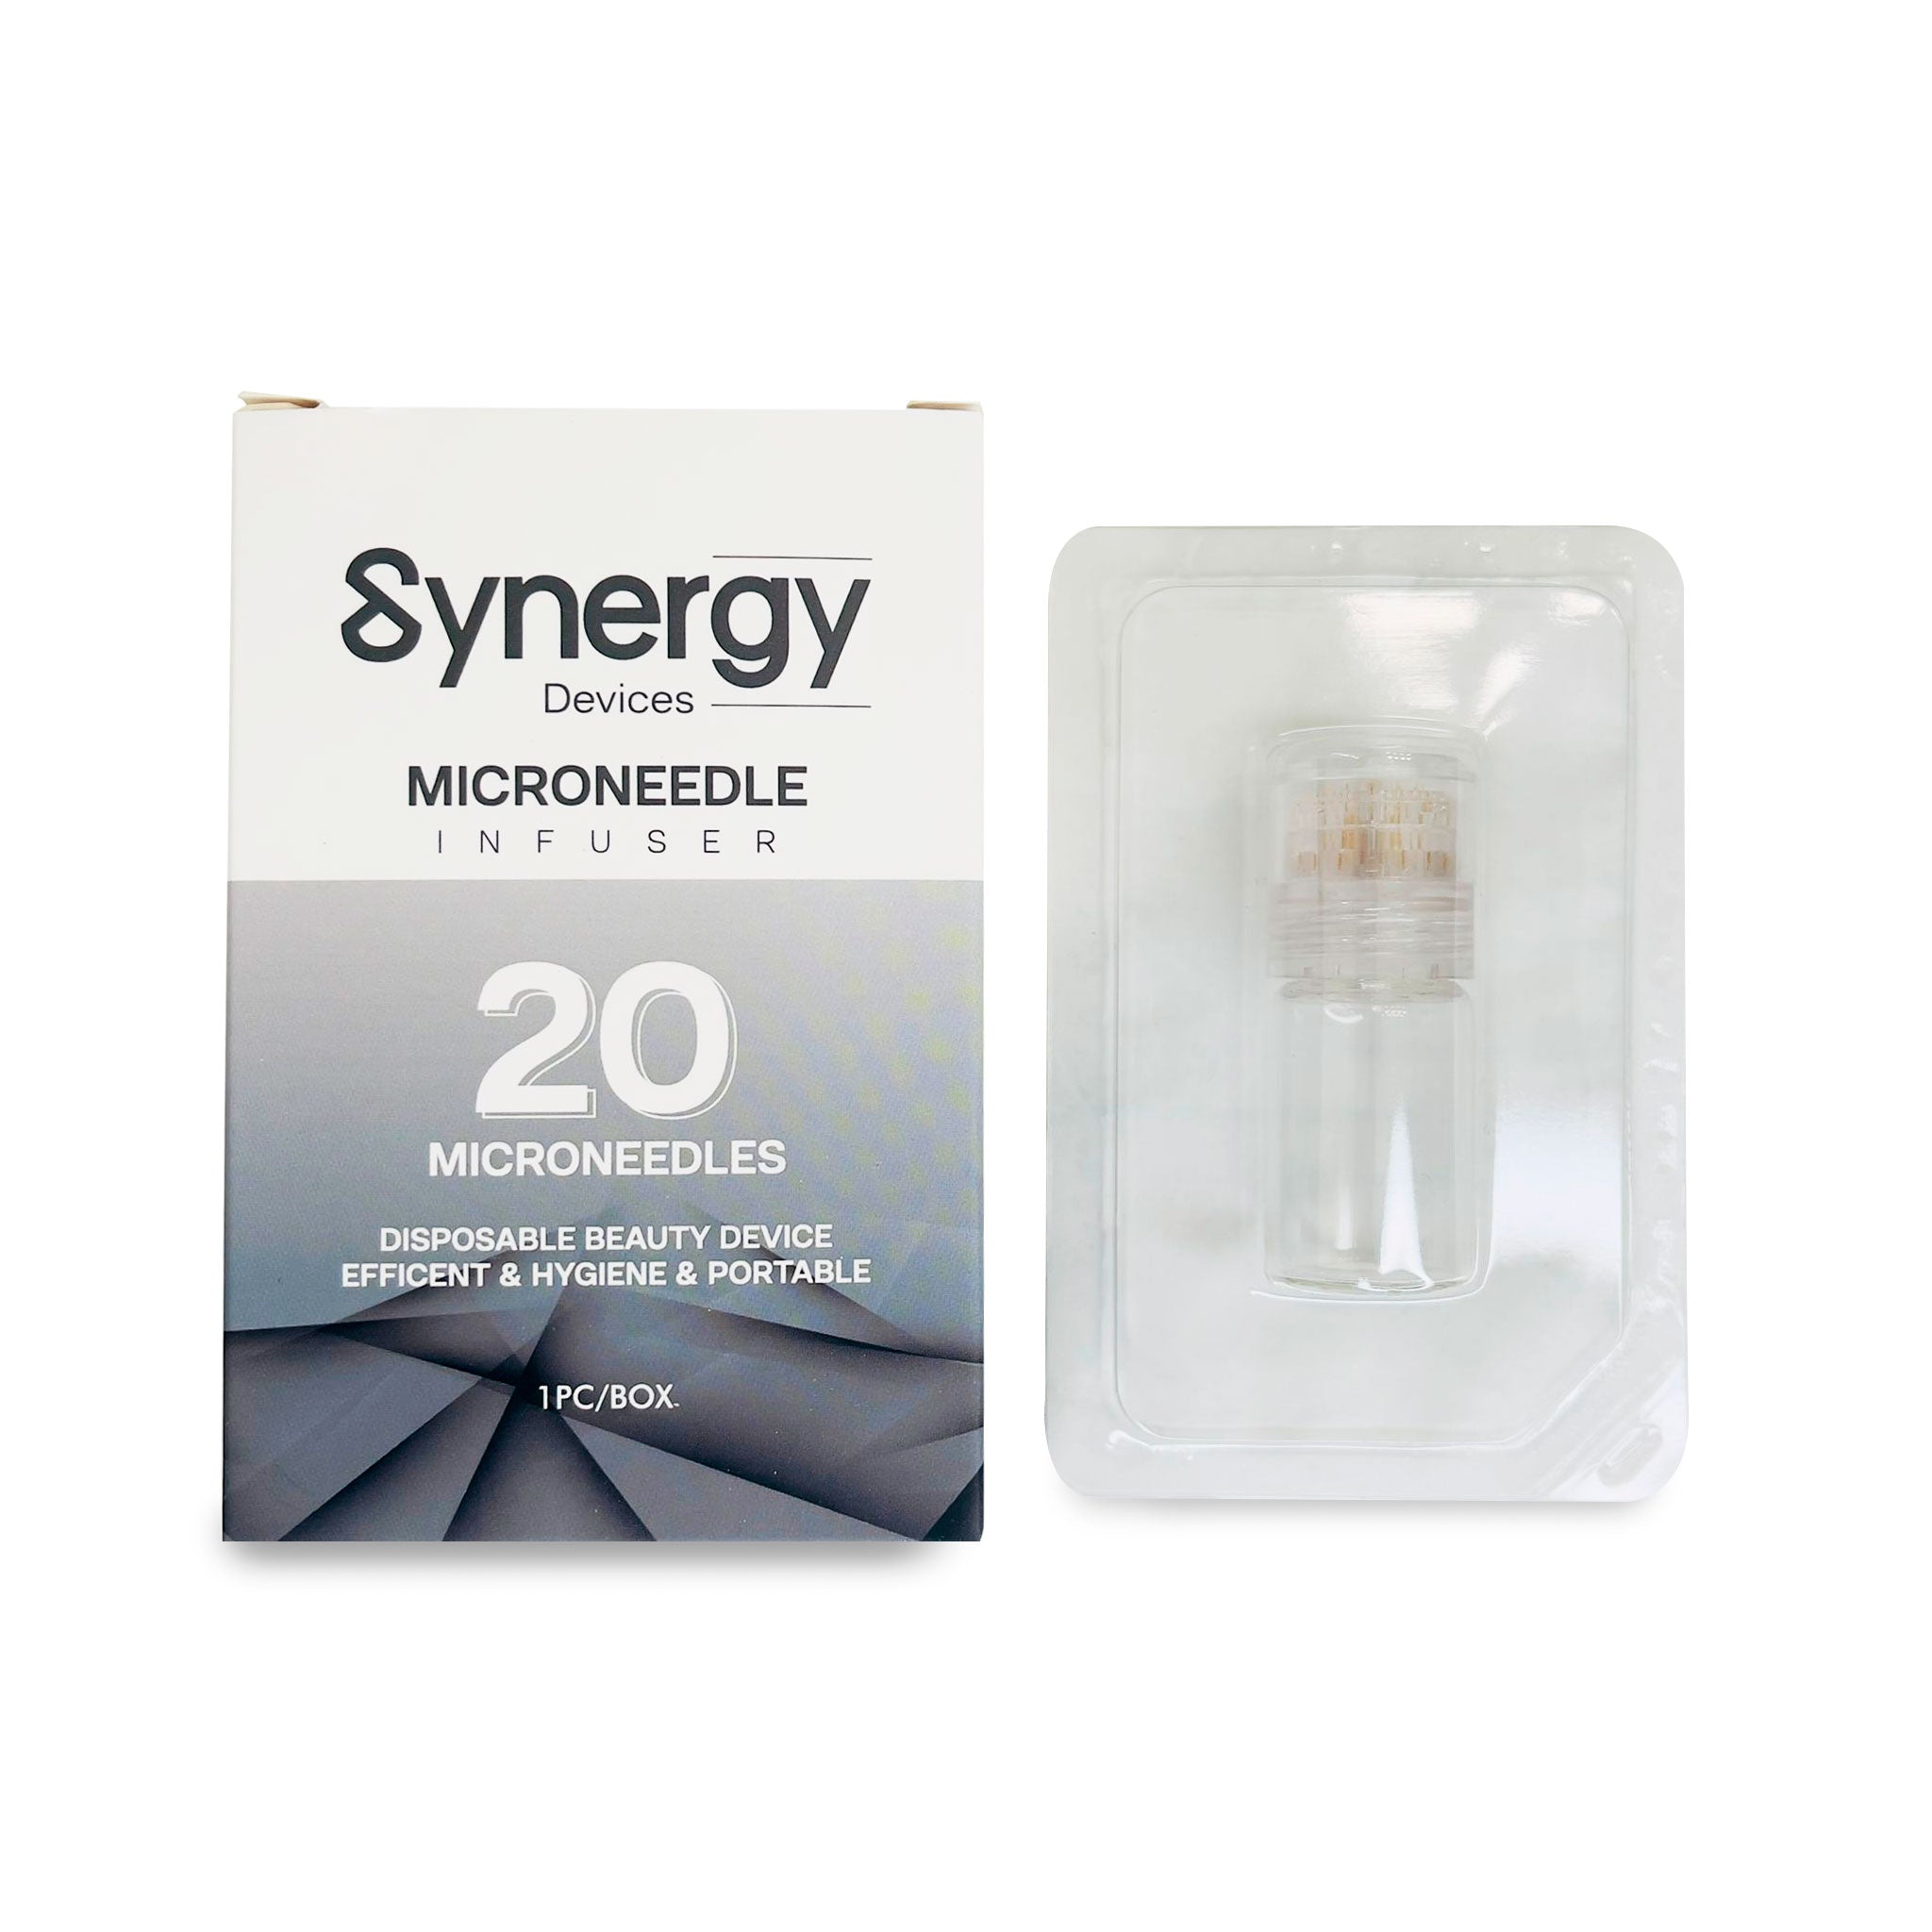 Microneedle Infuser Synergy, Microneedles for Mesotherapy